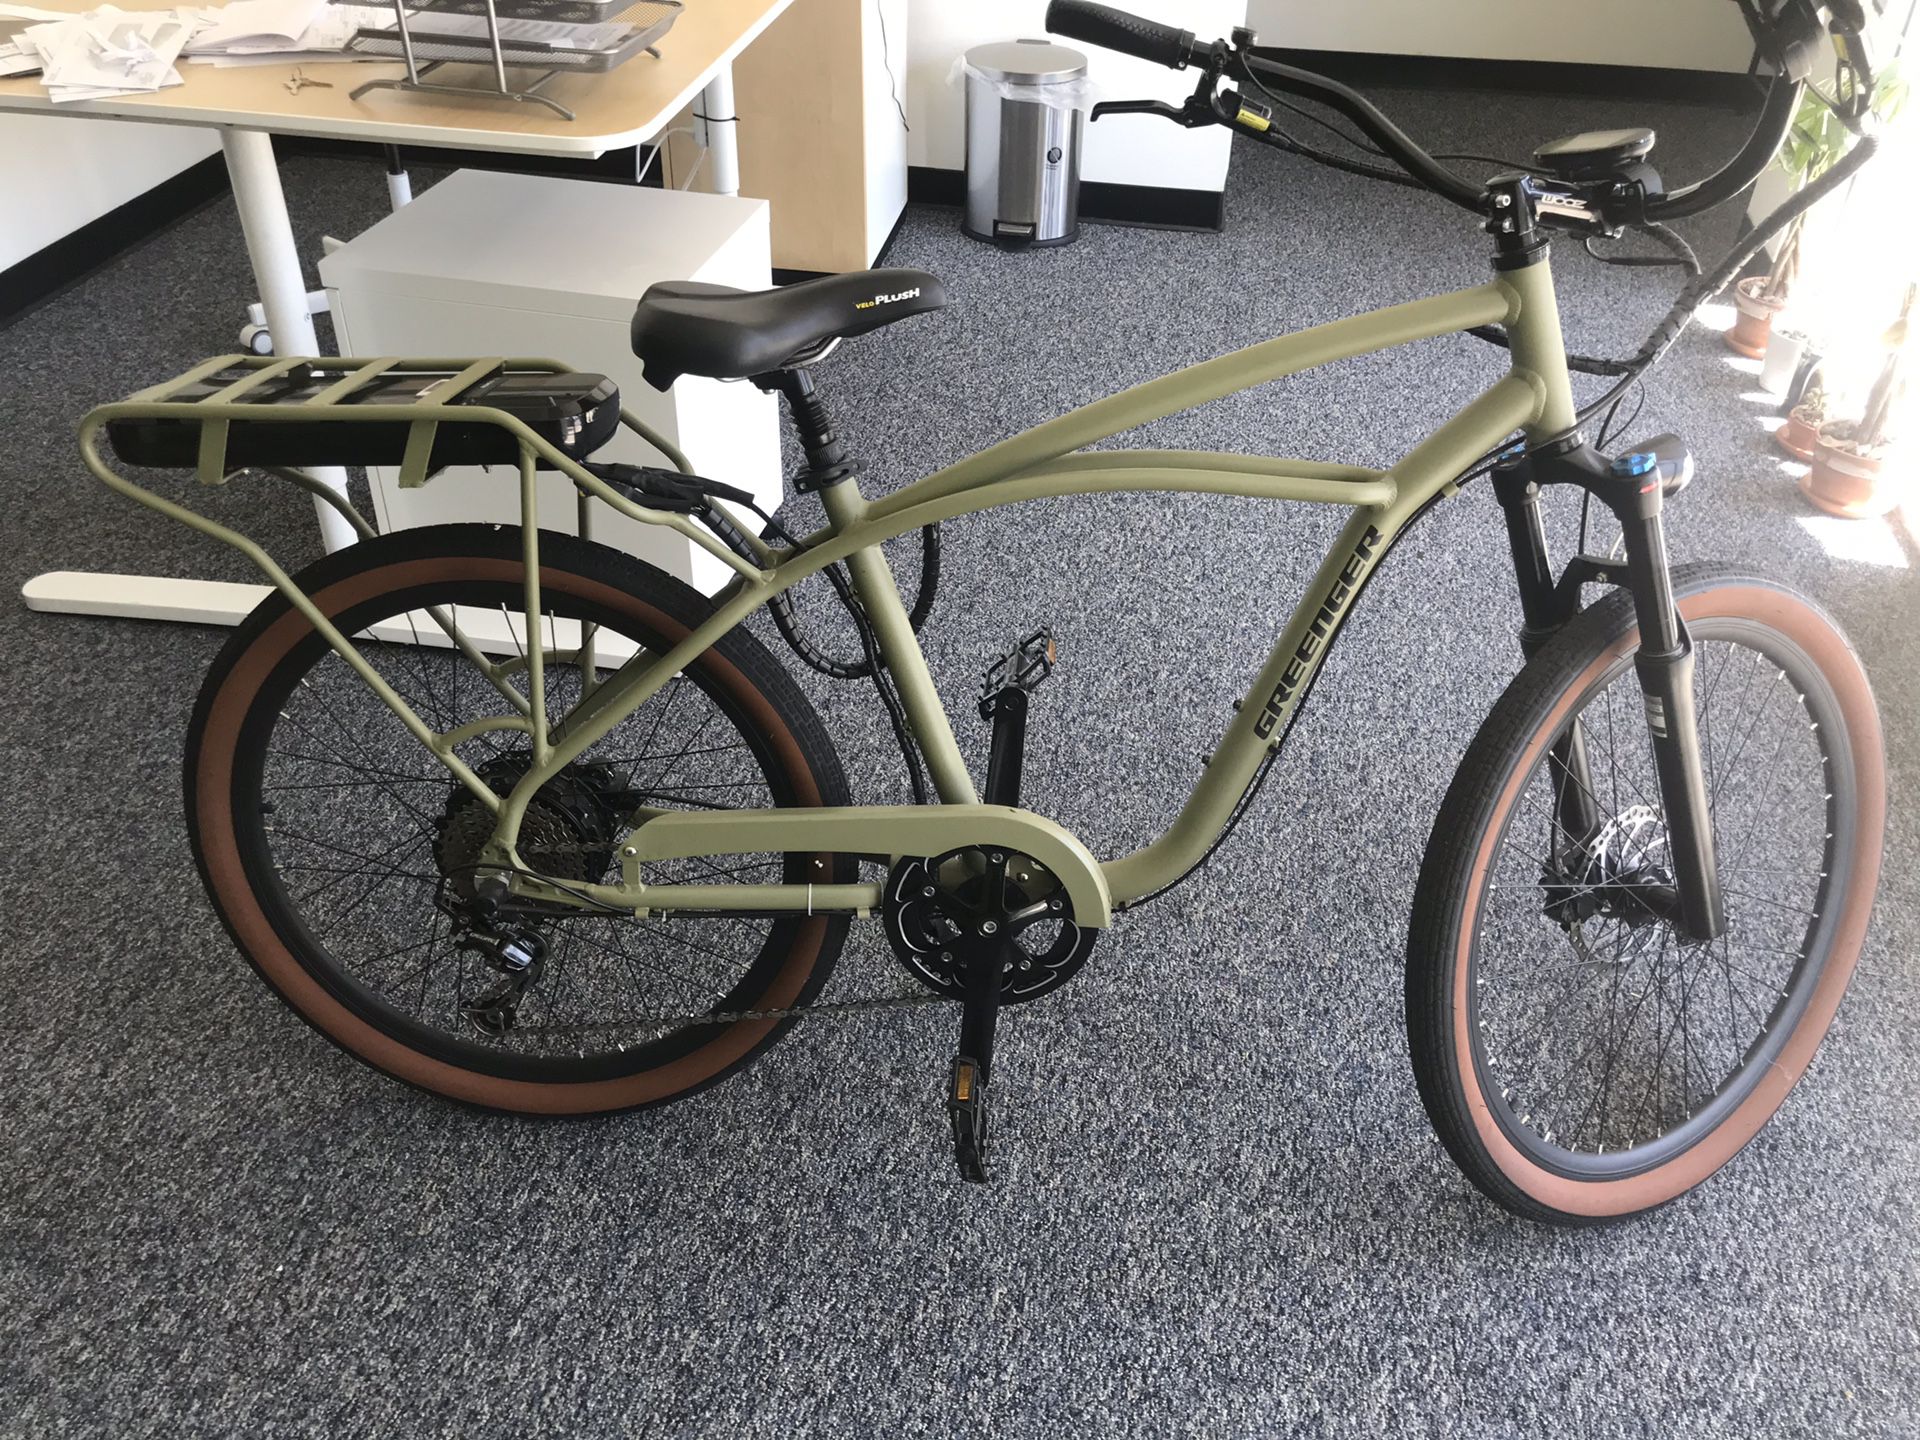 Brand new Electric bicycle